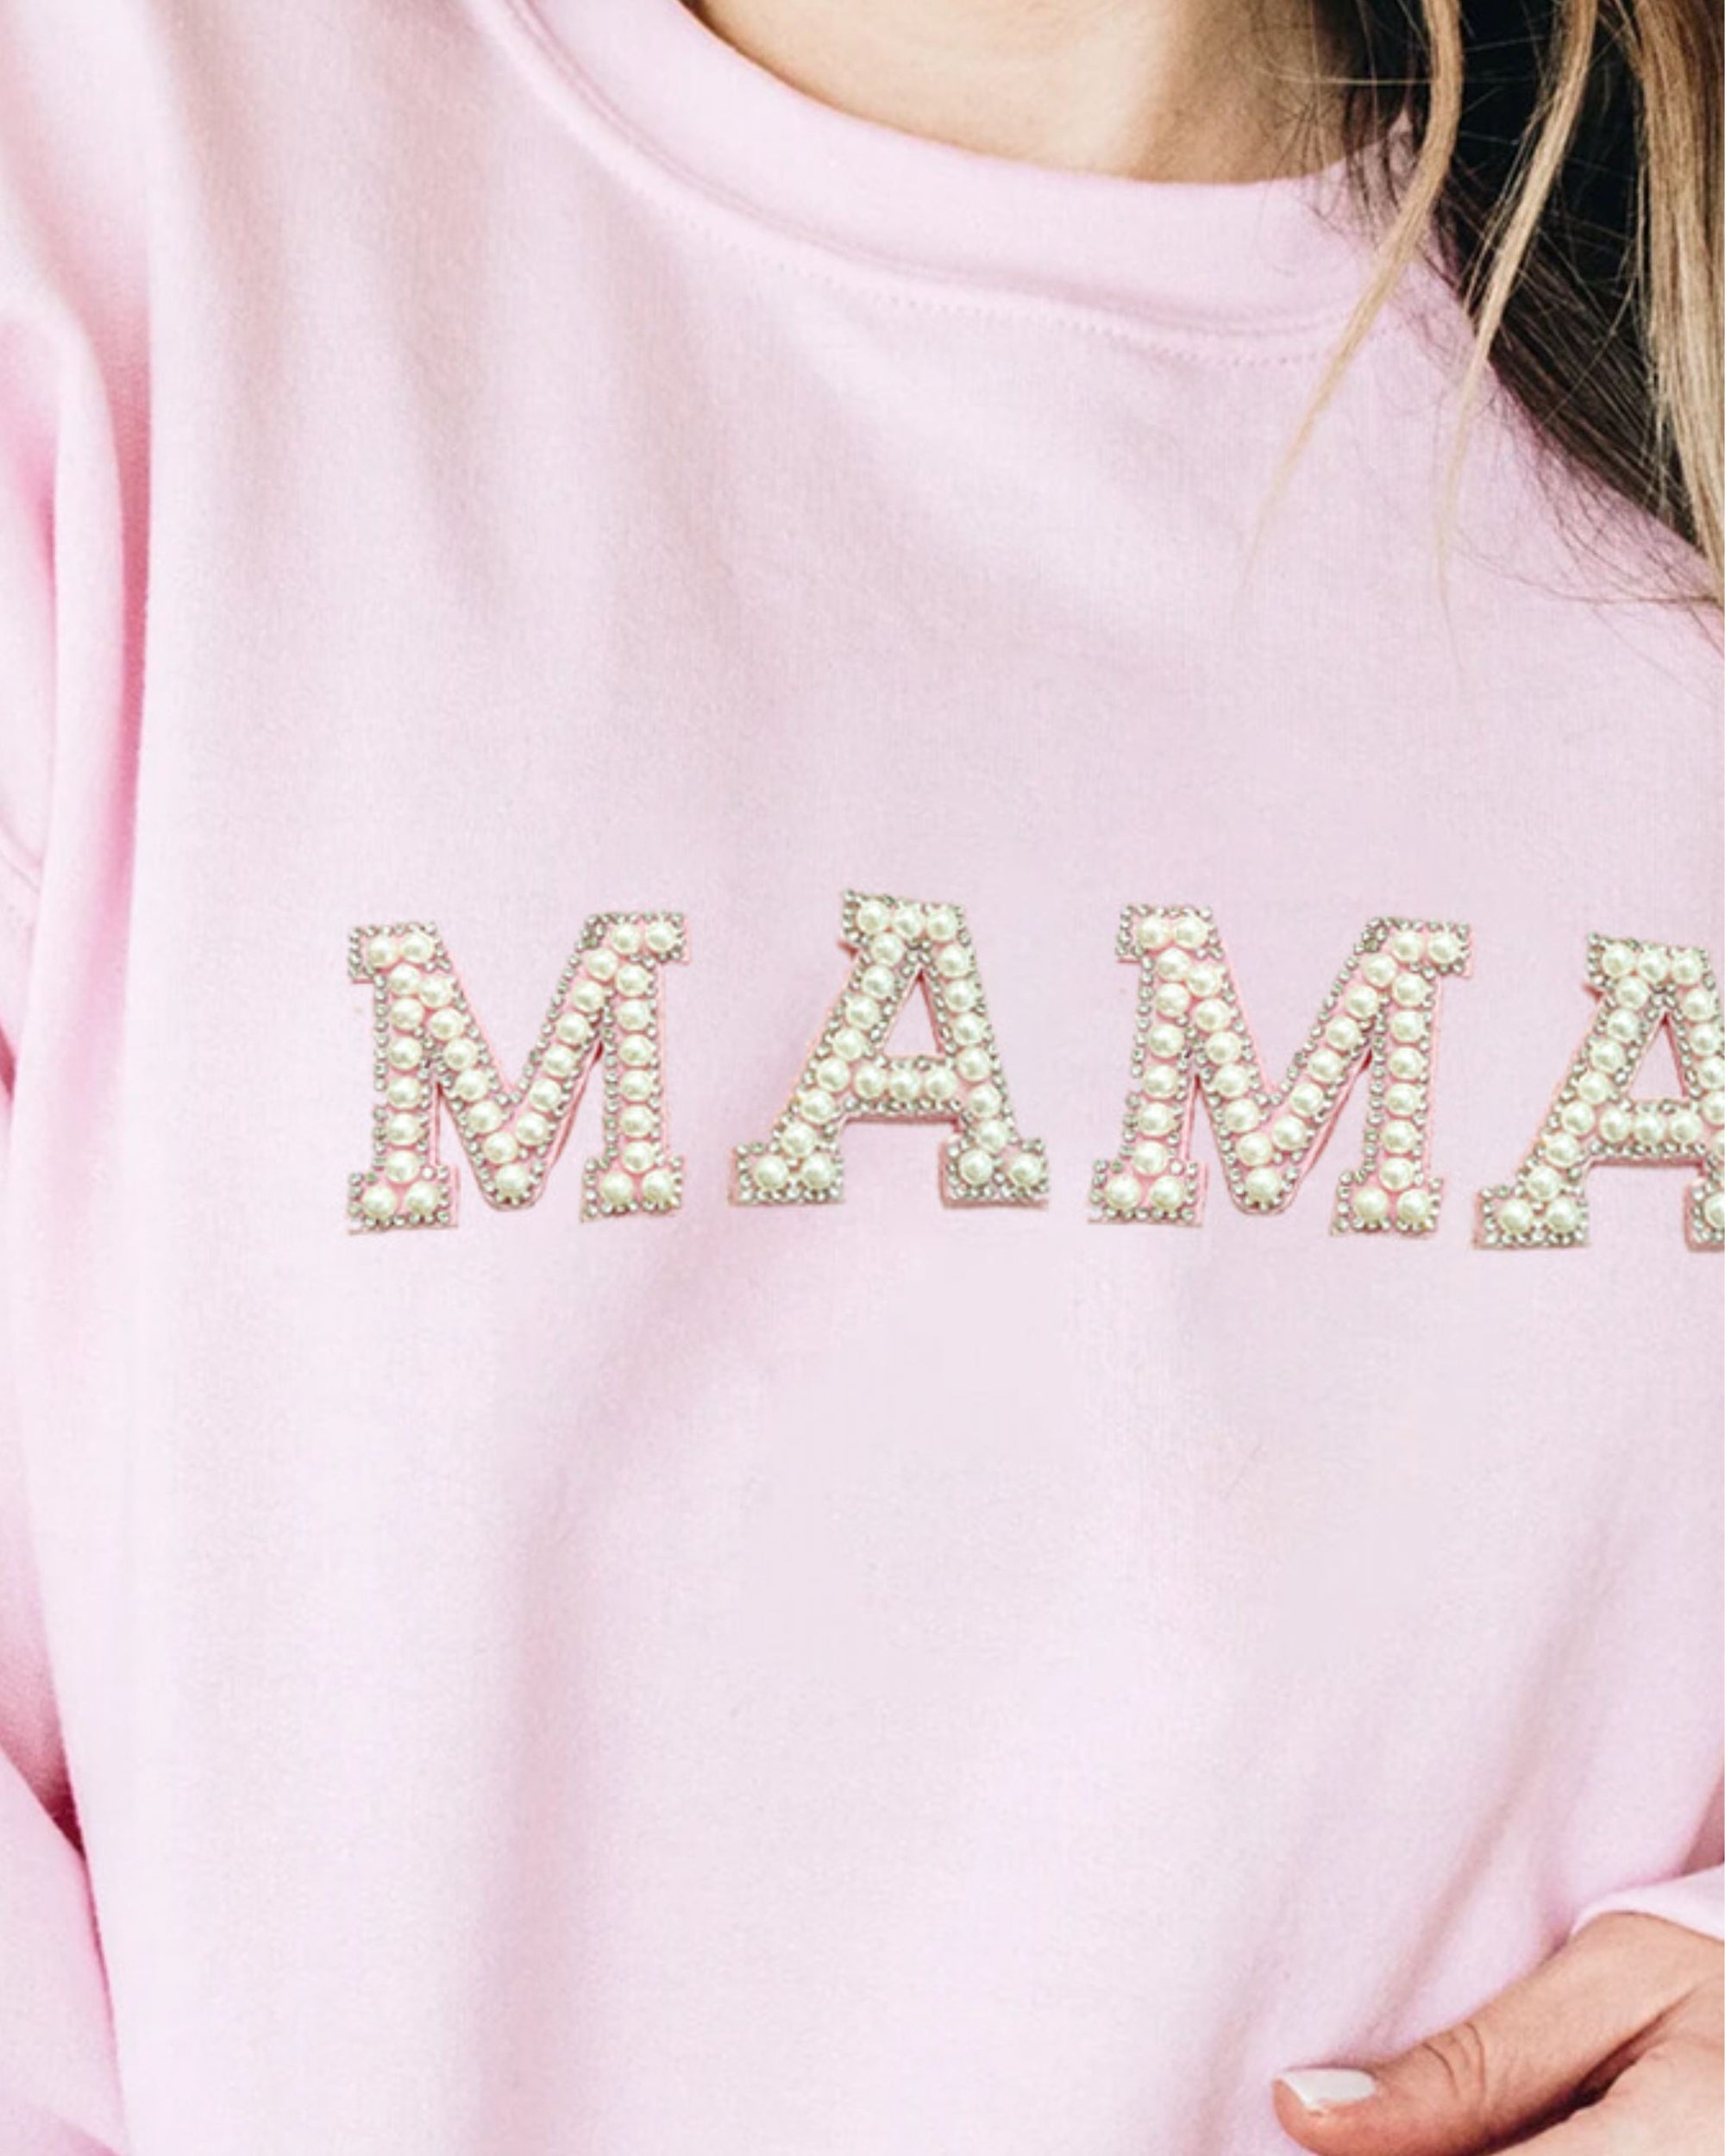 MAMA Pearl and Sparkle ✨ Crewneck - Premium Quality White or Pink